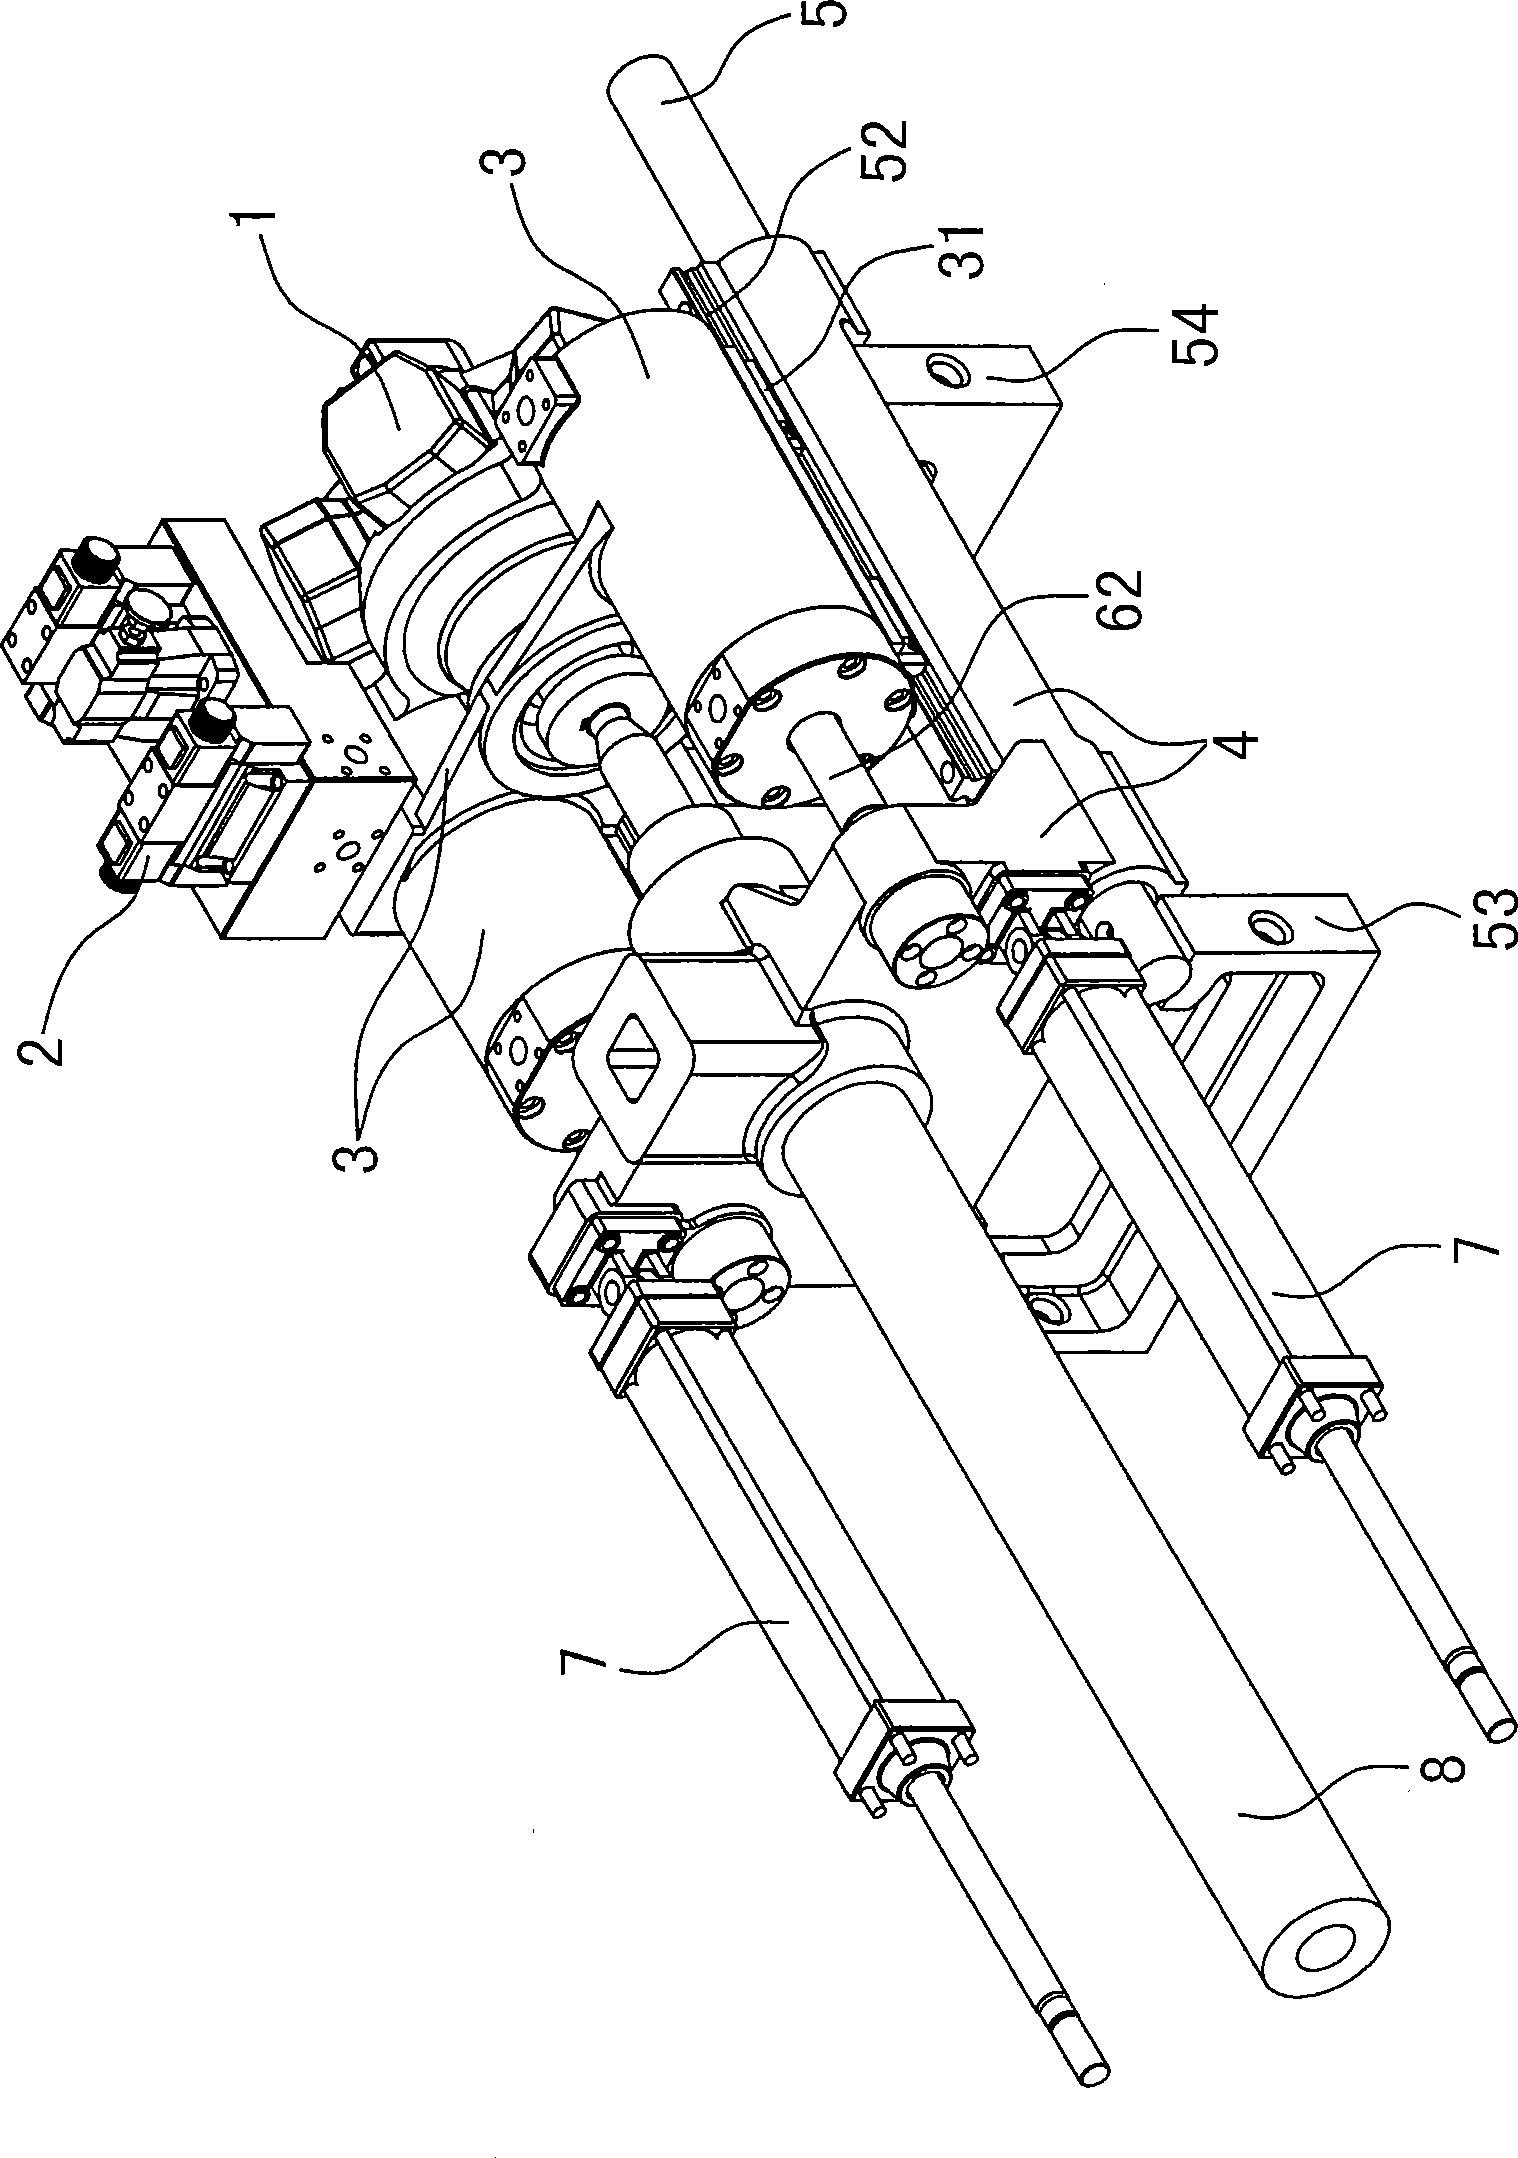 Injection mechanism of injection machine